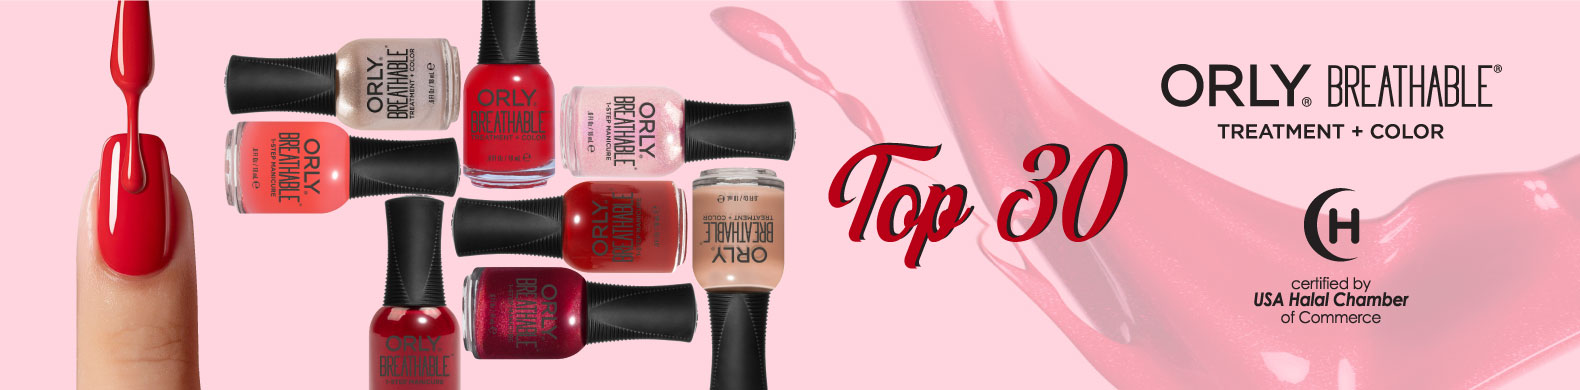 Orly Breathable Top 30